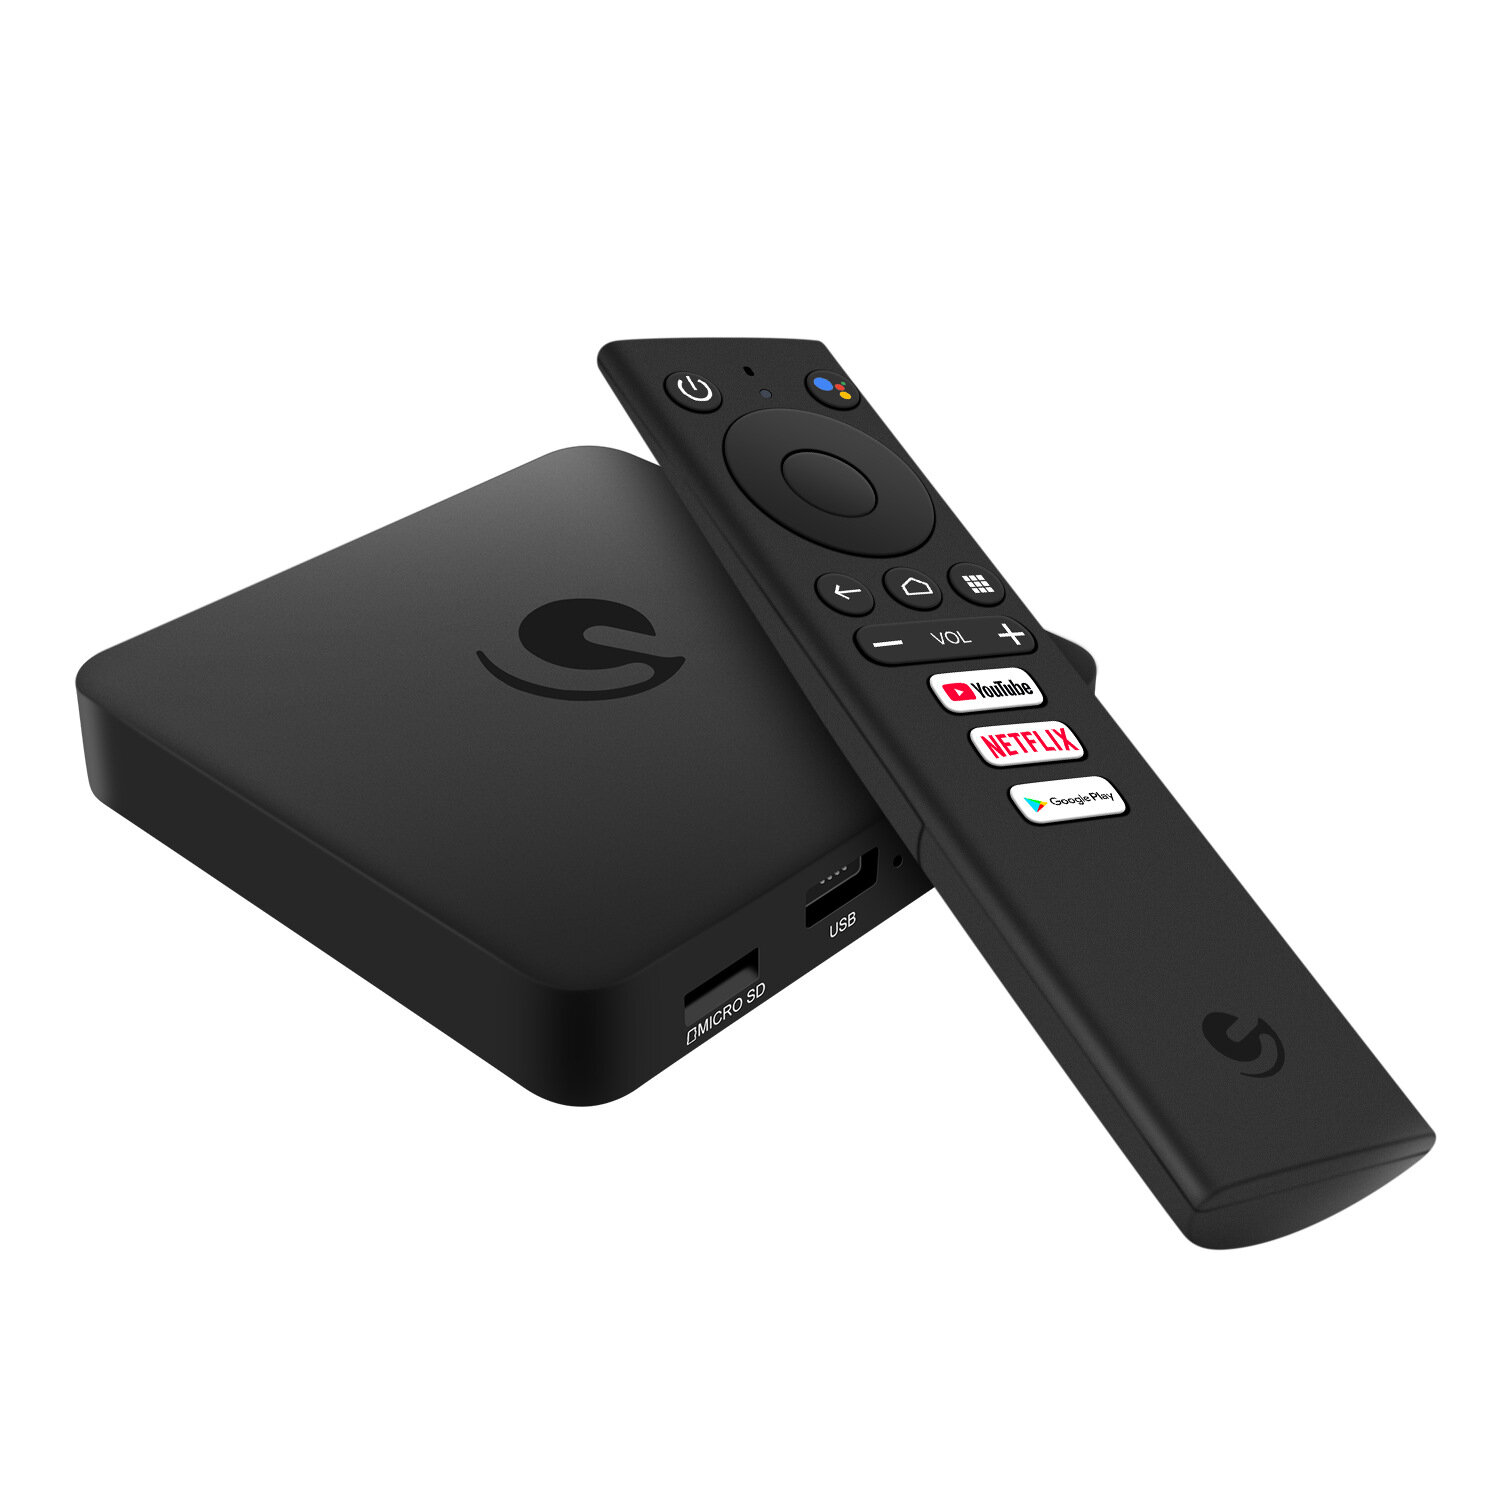 EMATIC Android 9.0 Voice Control Google CertifiedSet-Top Box Smart Player Netflix 4K Dual-band ATV set-top box